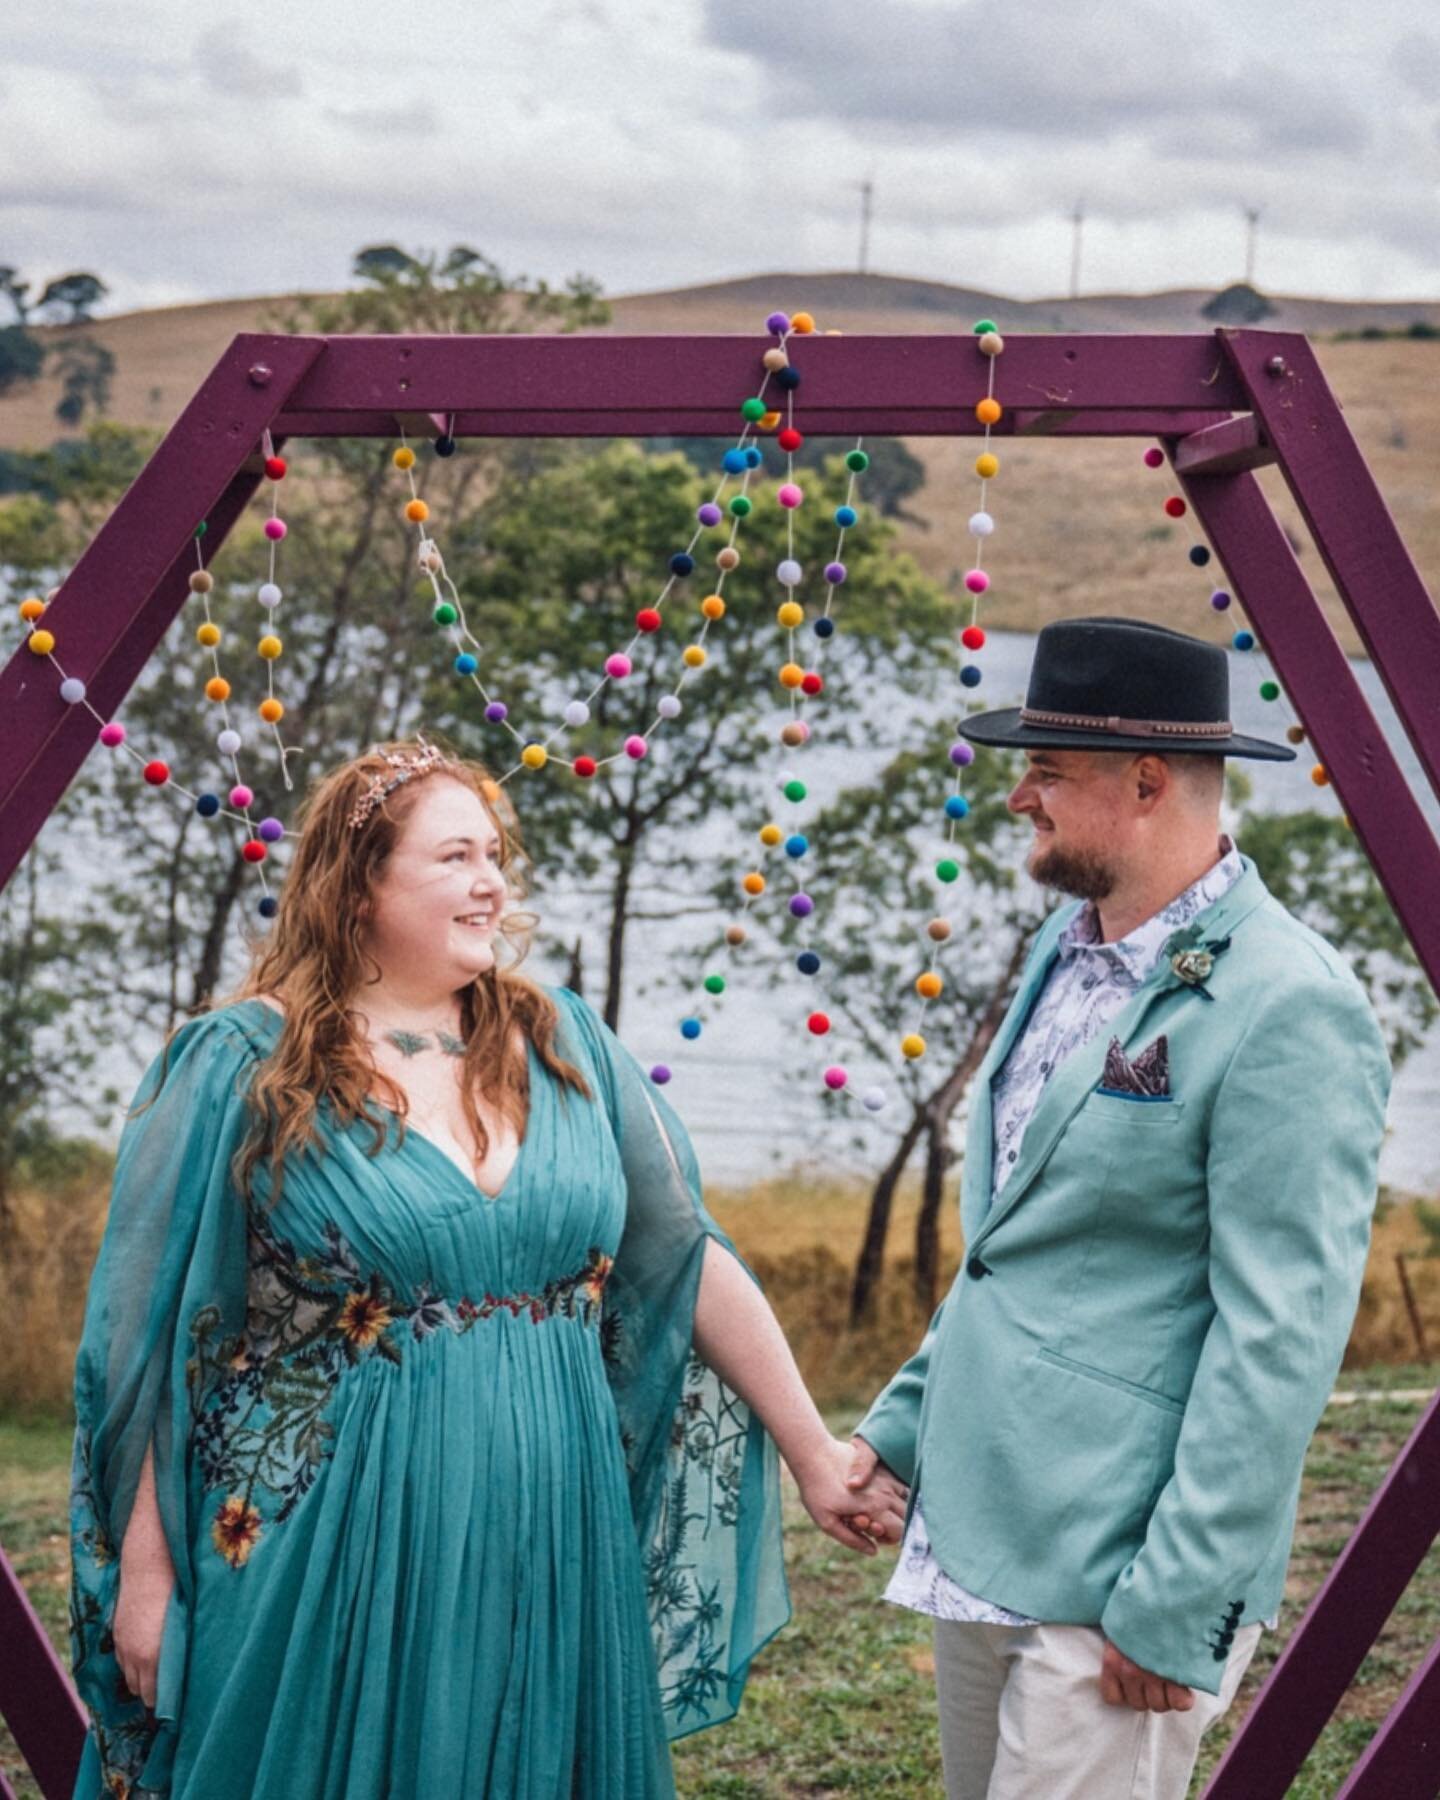 💜Ian and Merryn💜

In awe of all that these two brought to life on their wedding day. Their likes and their hobbies tied in to all the details! 

The sky opened up seconds after the ceremony finished. And it rained so hard we abandoned plans for a C